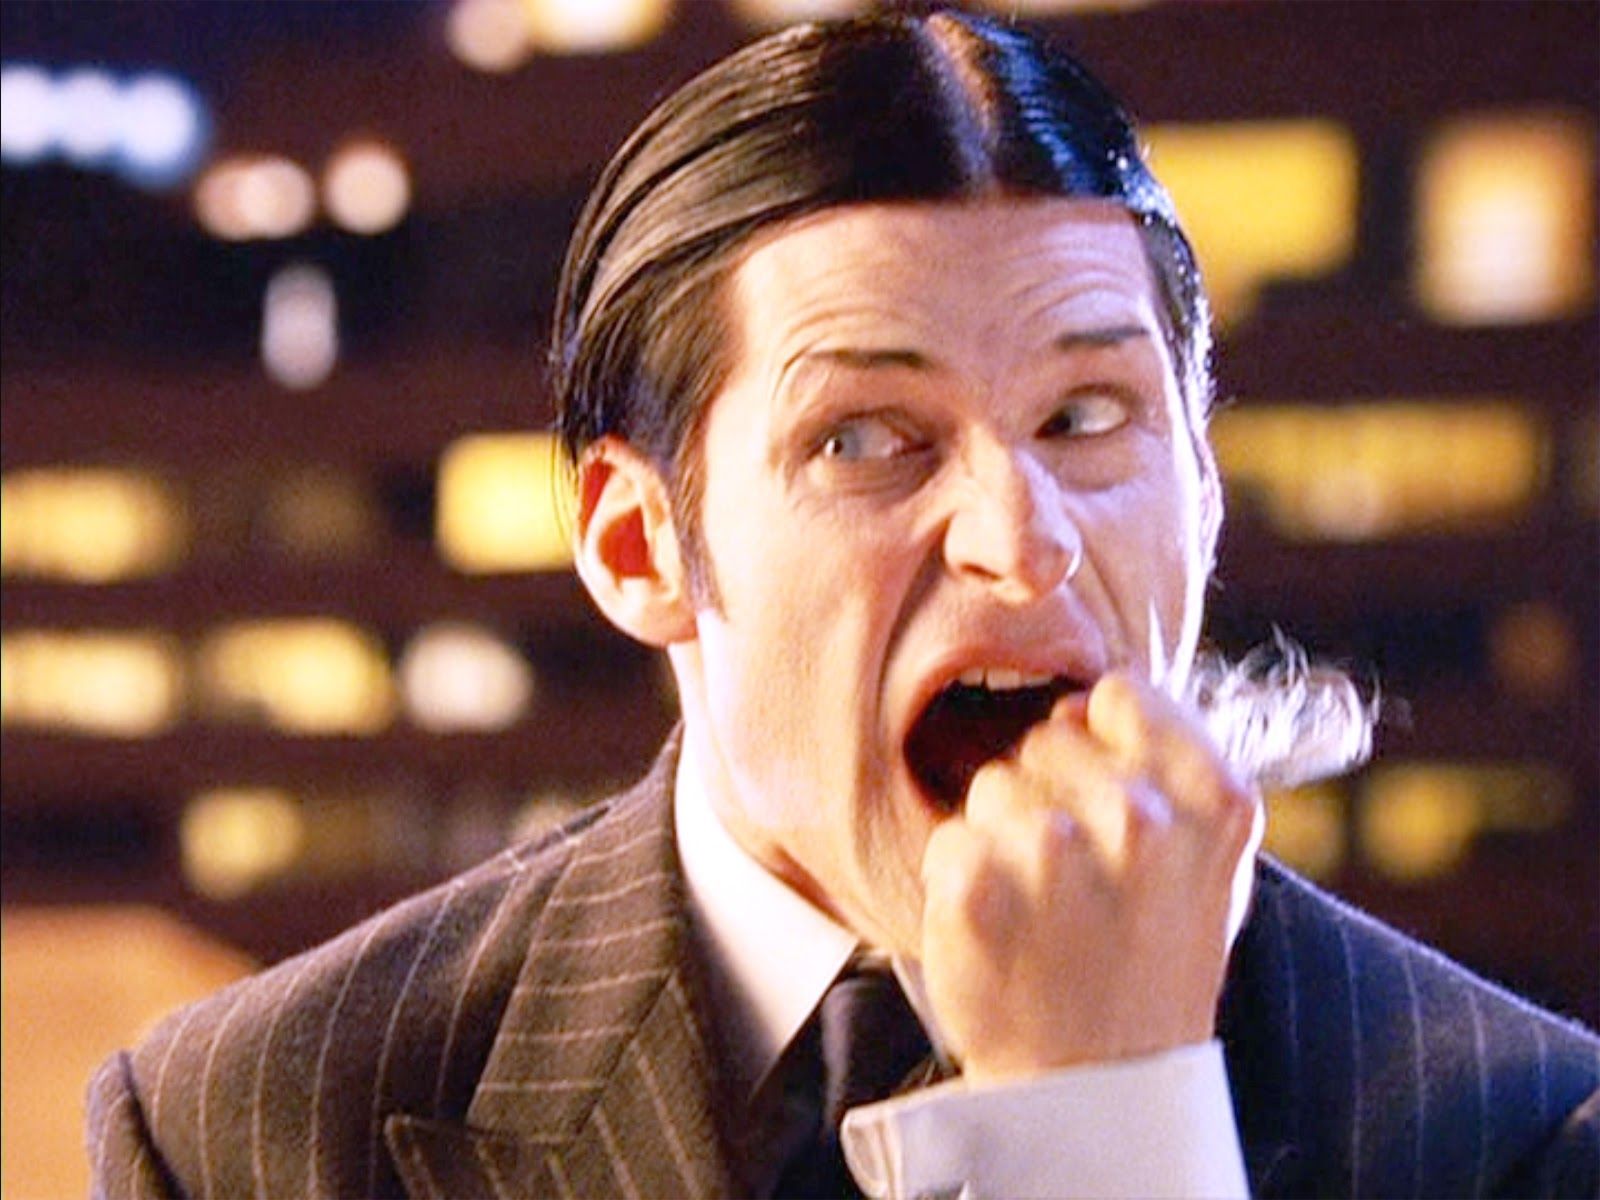 Crispin Glover Plays a Psychopathic Contract Killer in 'Lucky Day'